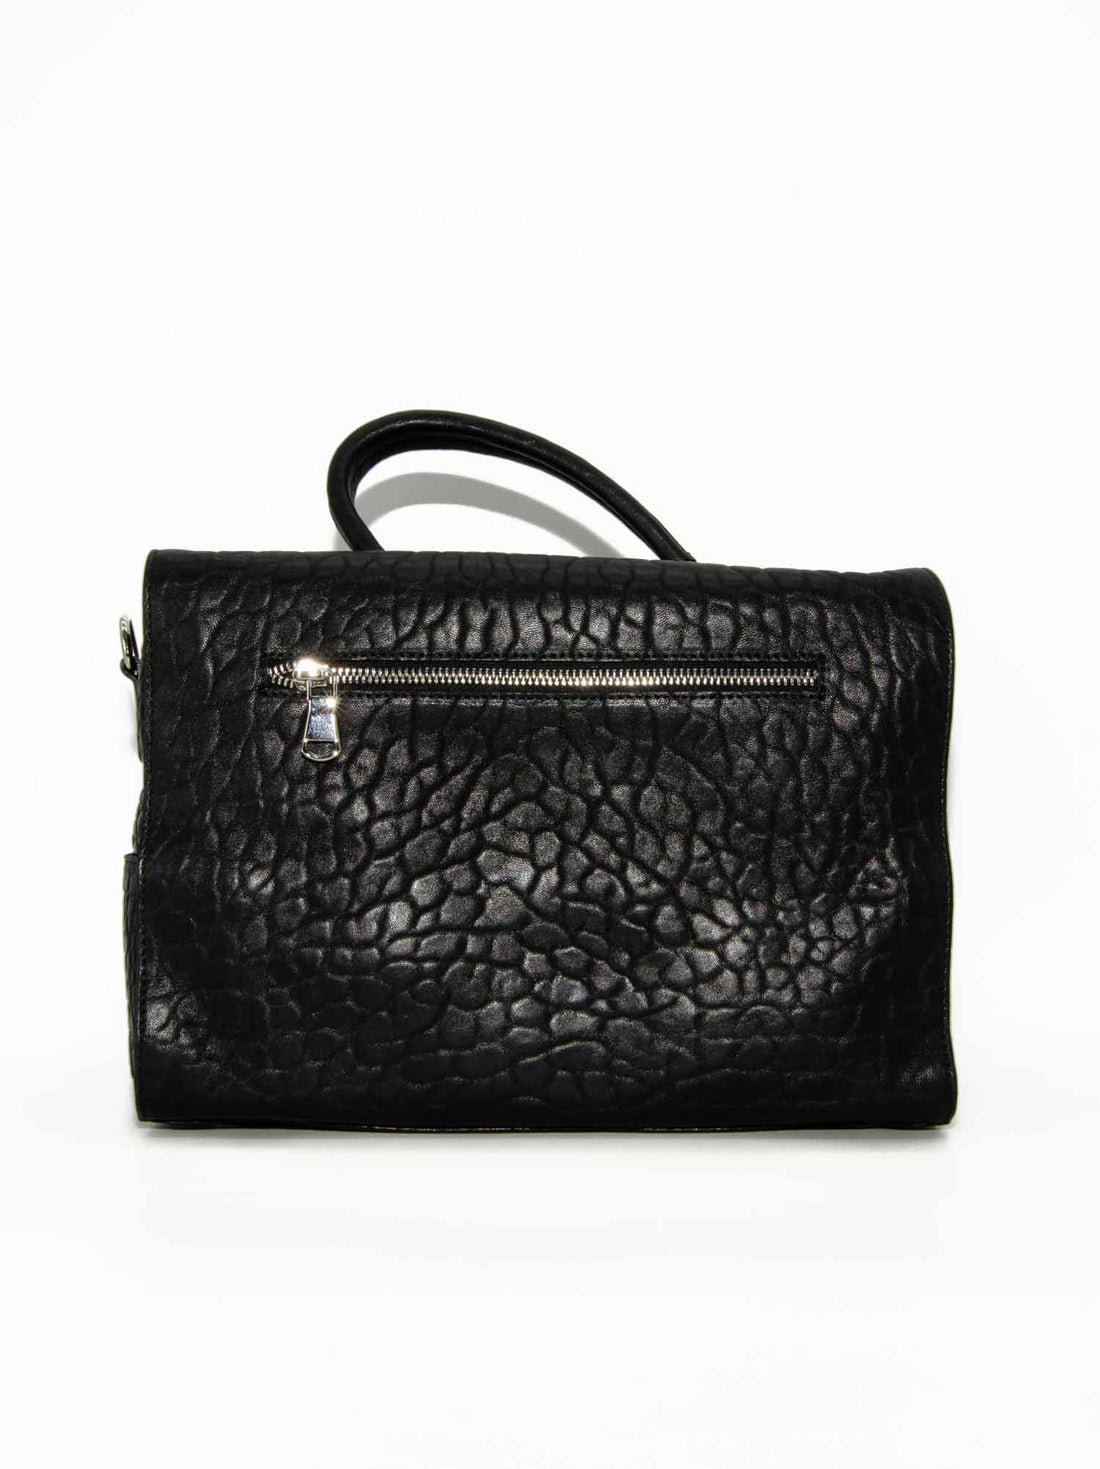 LEATHER TRUNK BAG